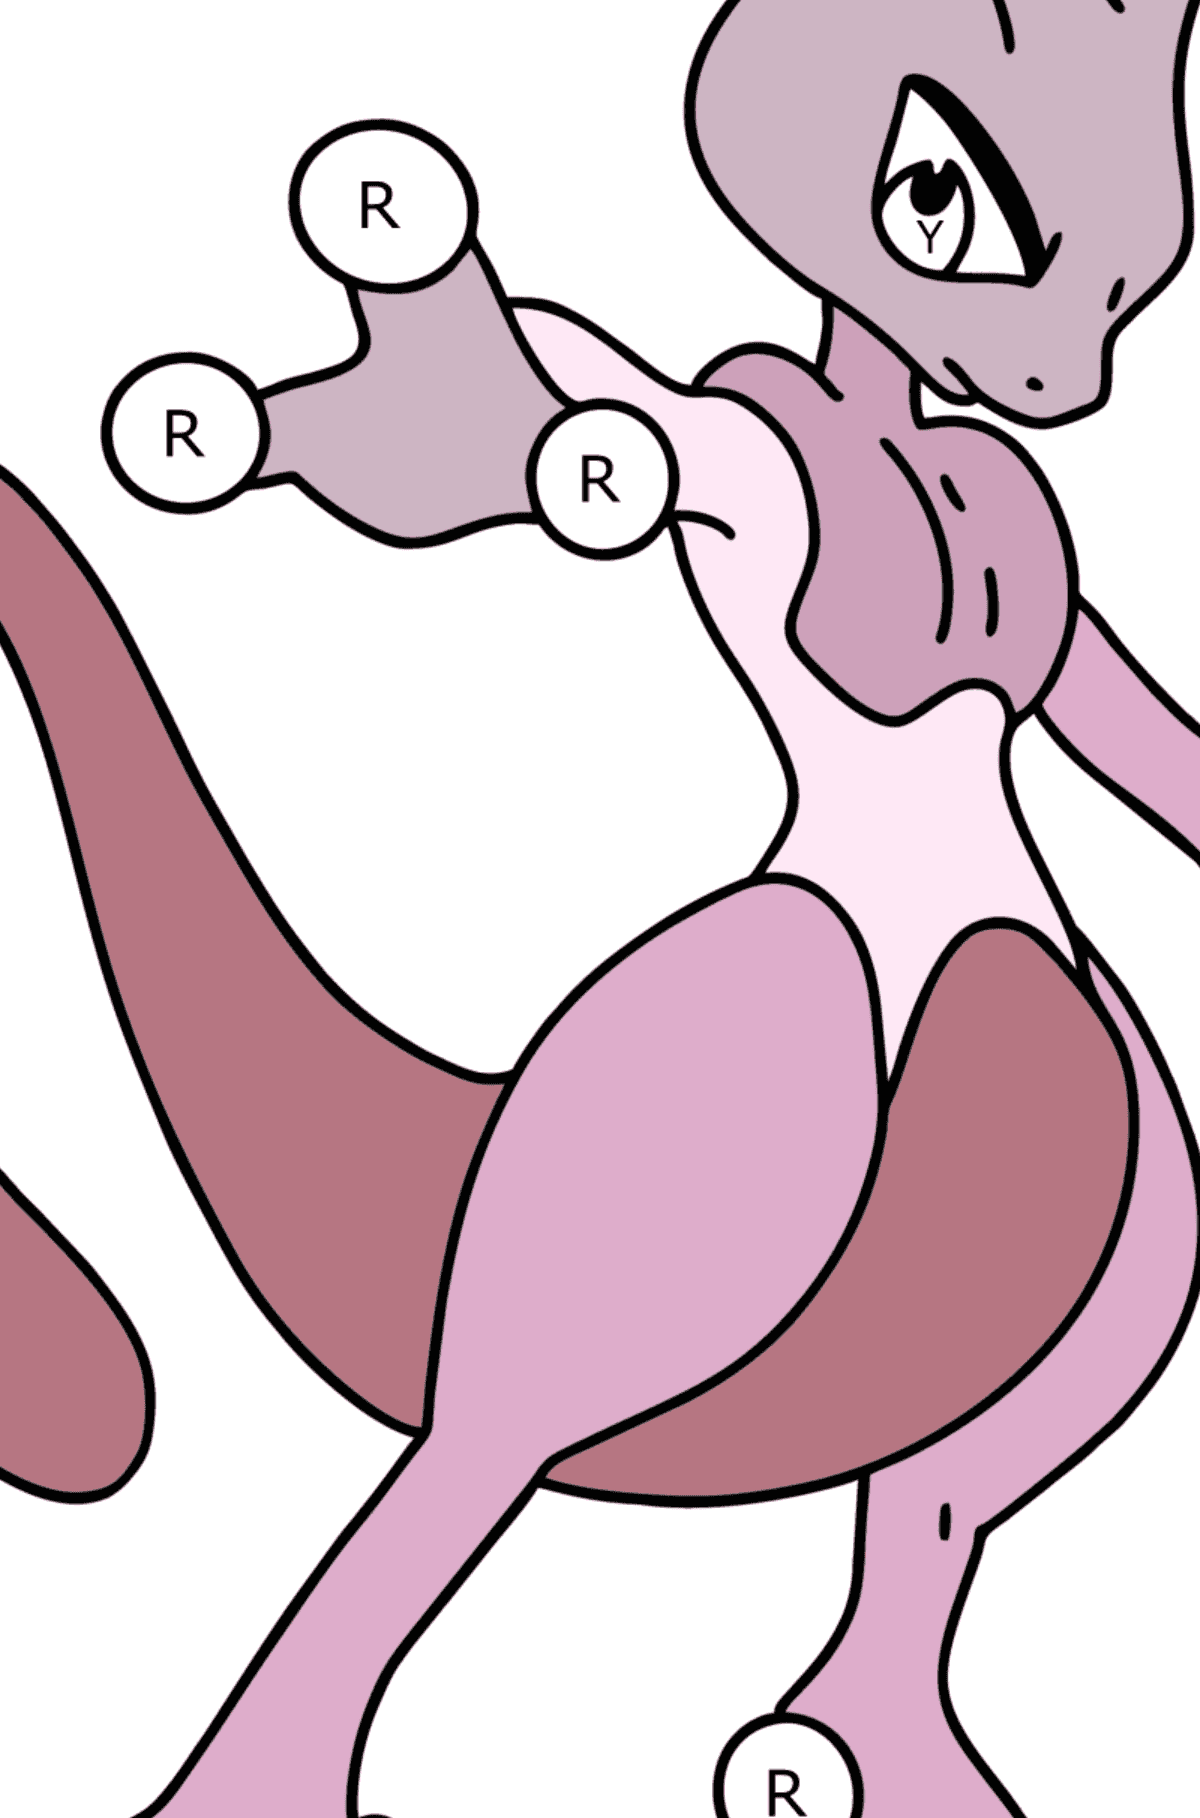 Coloring page Pokemon Go Mewtwo - Coloring by Letters for Kids